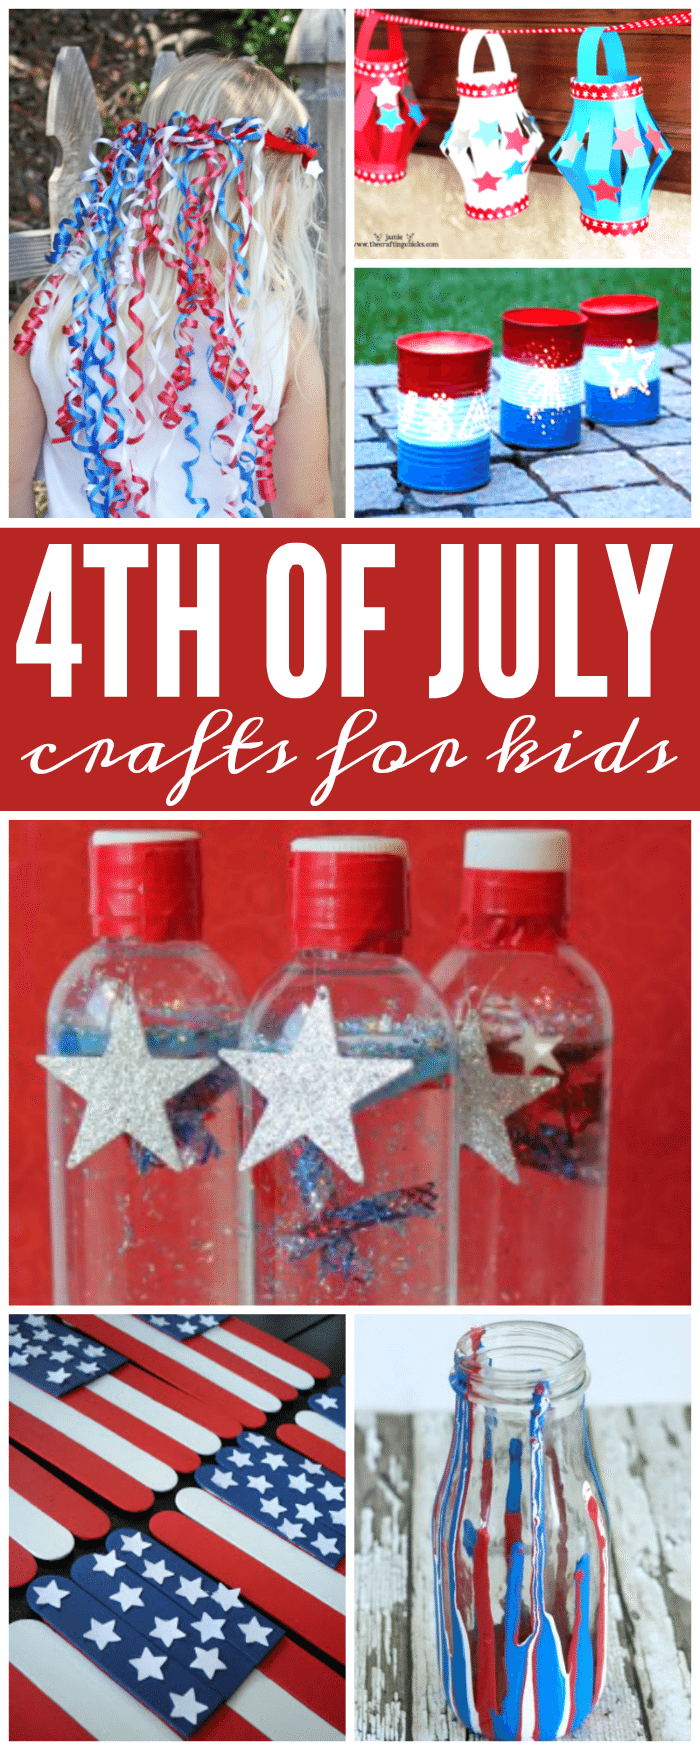 4Th Of July For Kids 2